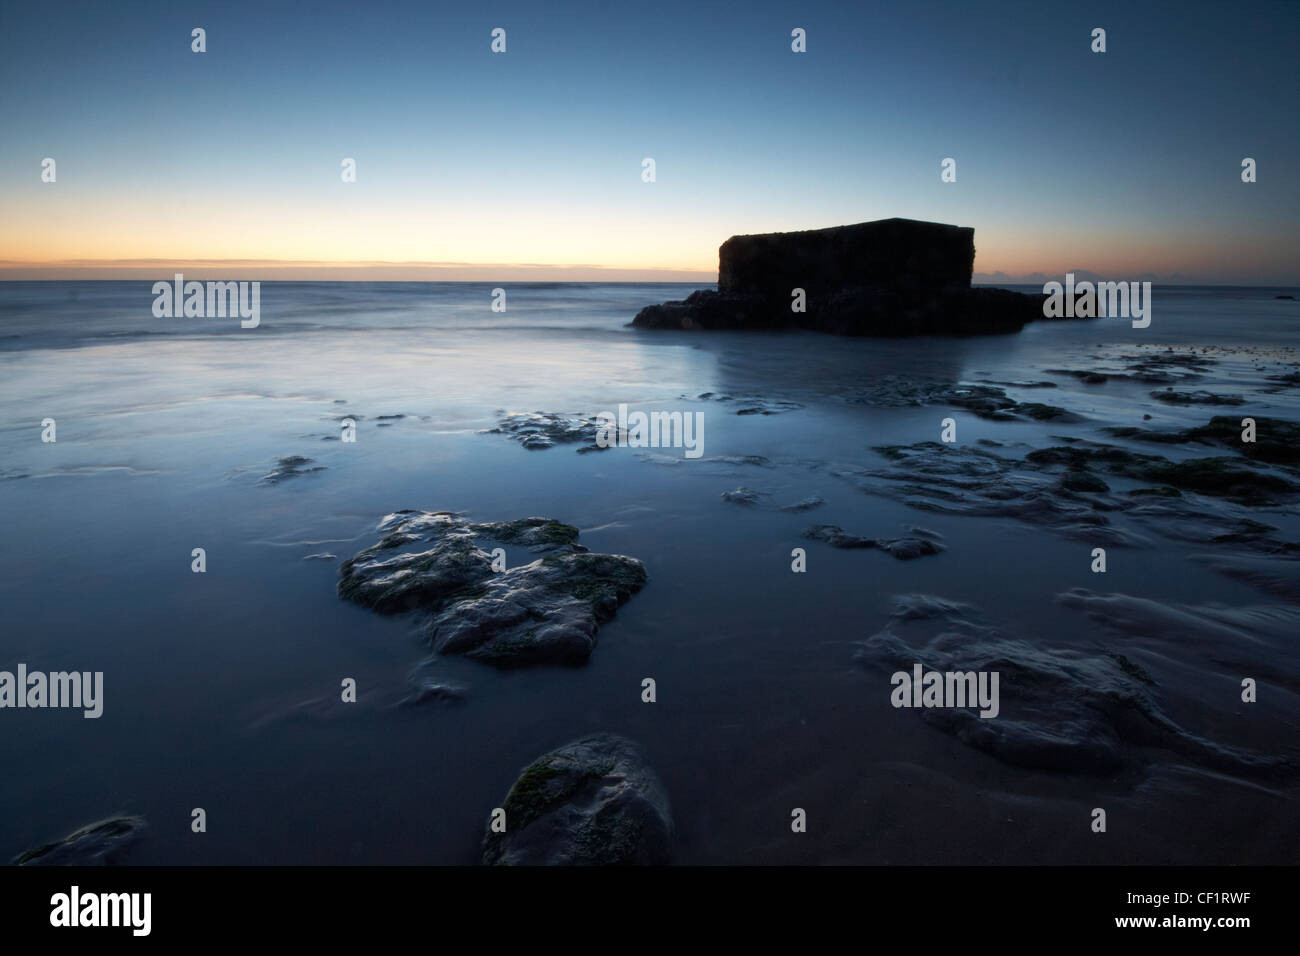 A pillbox on the beach at the Naze in early dawn light. Stock Photo